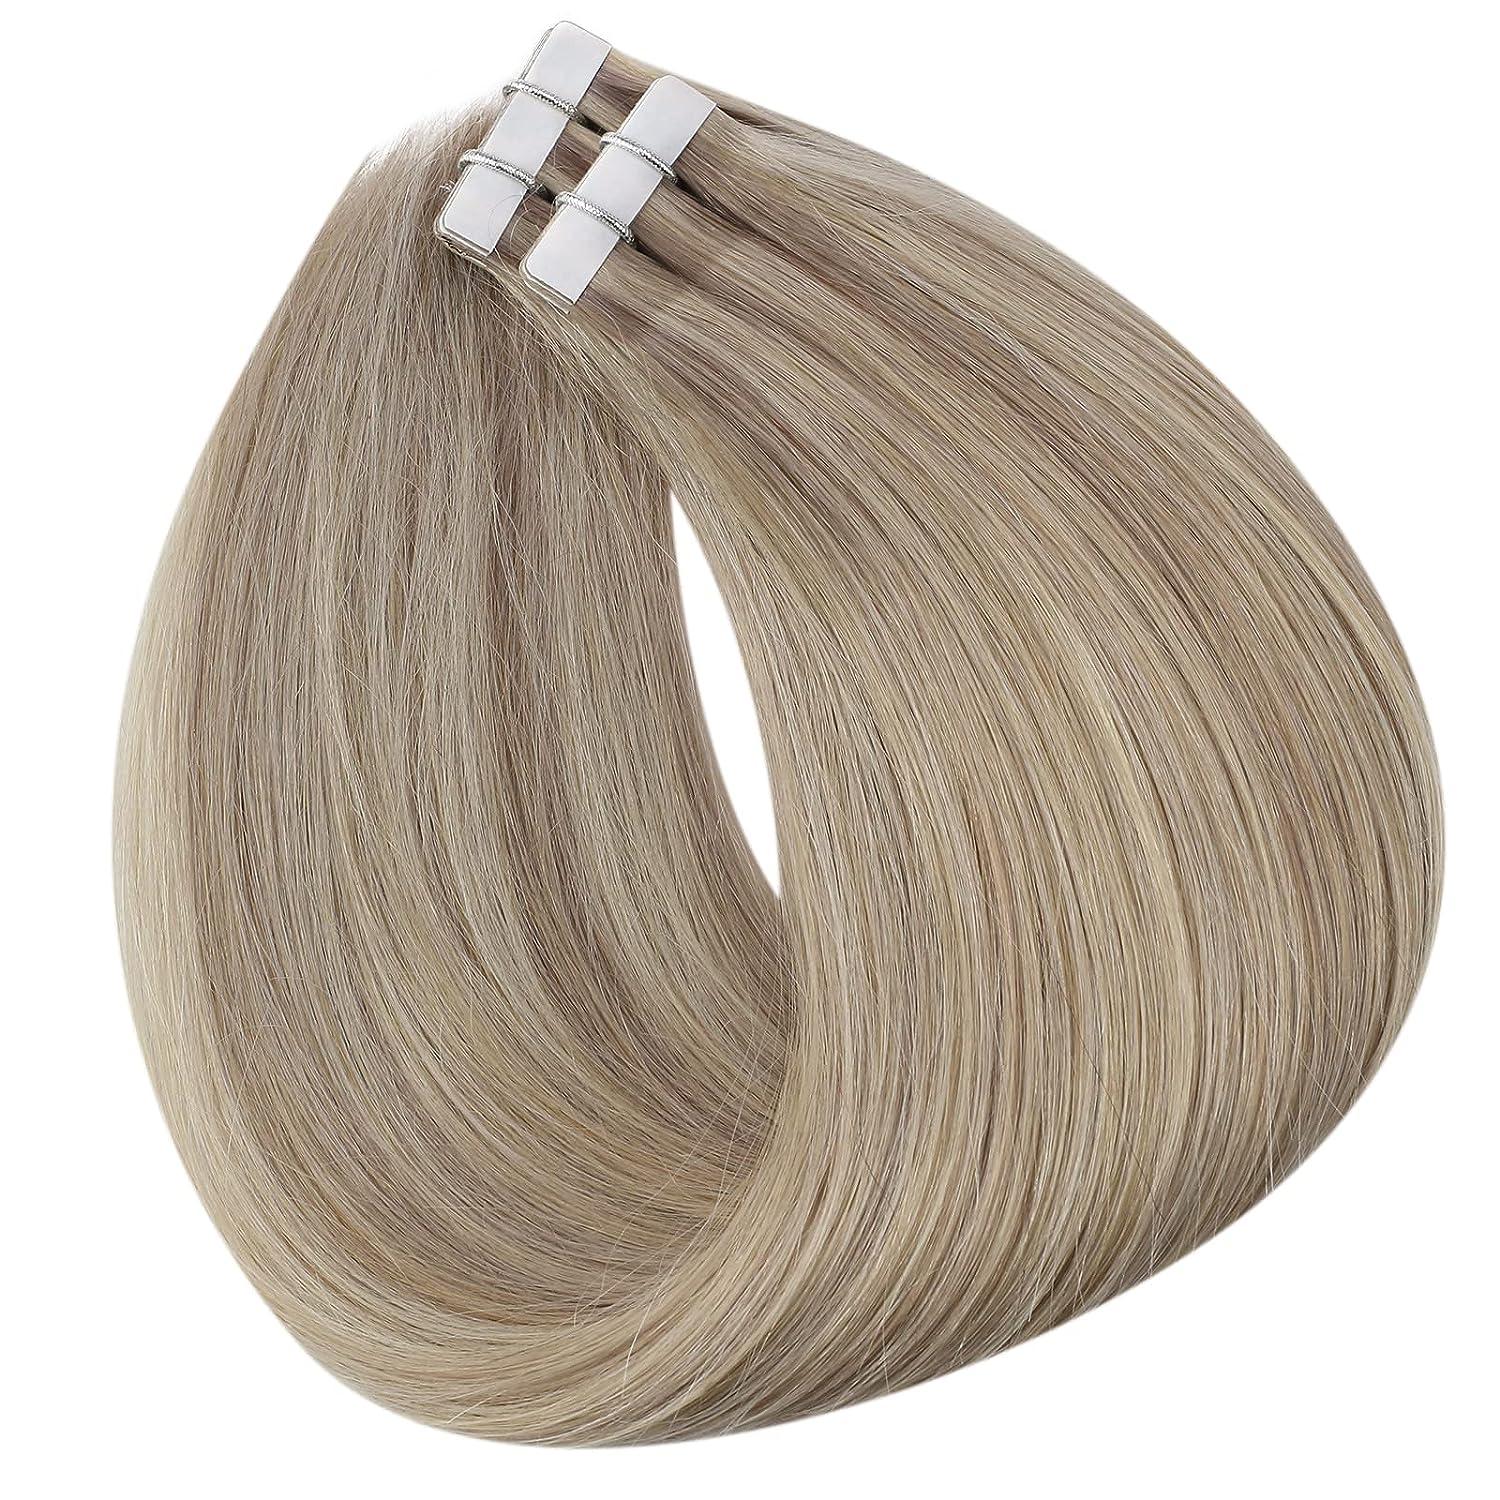 Full Shine Tape in Hair Extensions Human Hair 14 Inch Highlighted